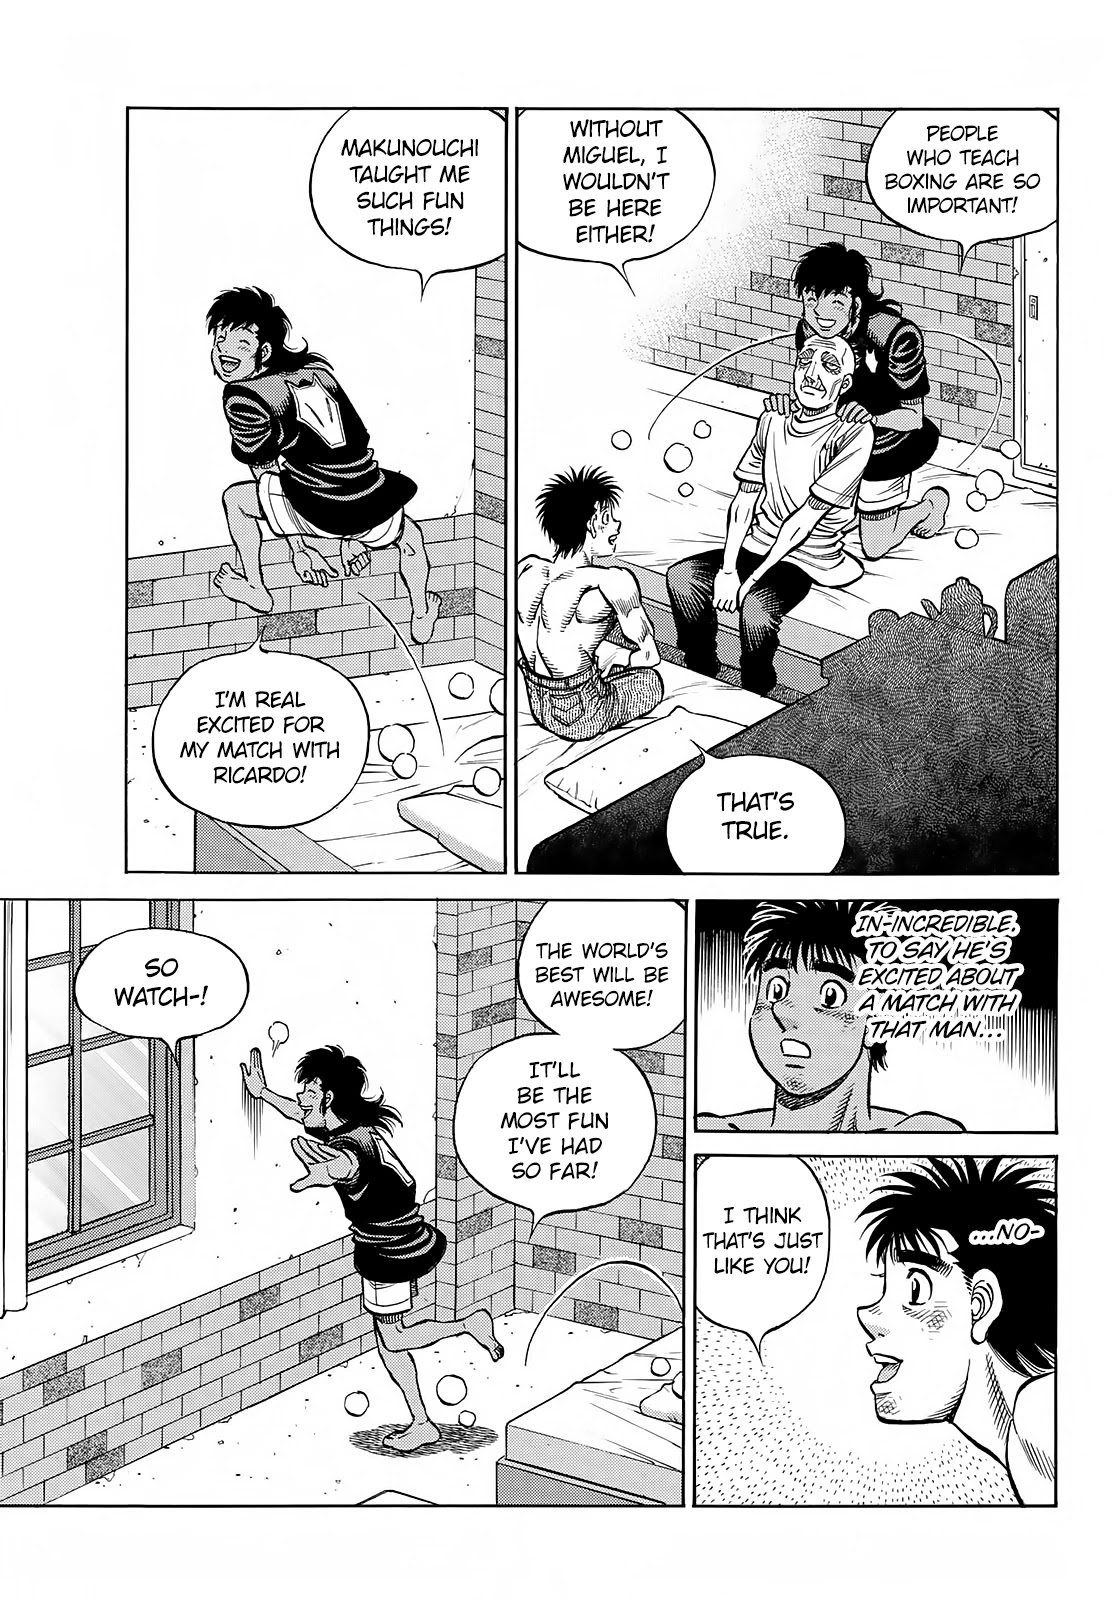 Hajime no Ippo, Chapter 1387 What